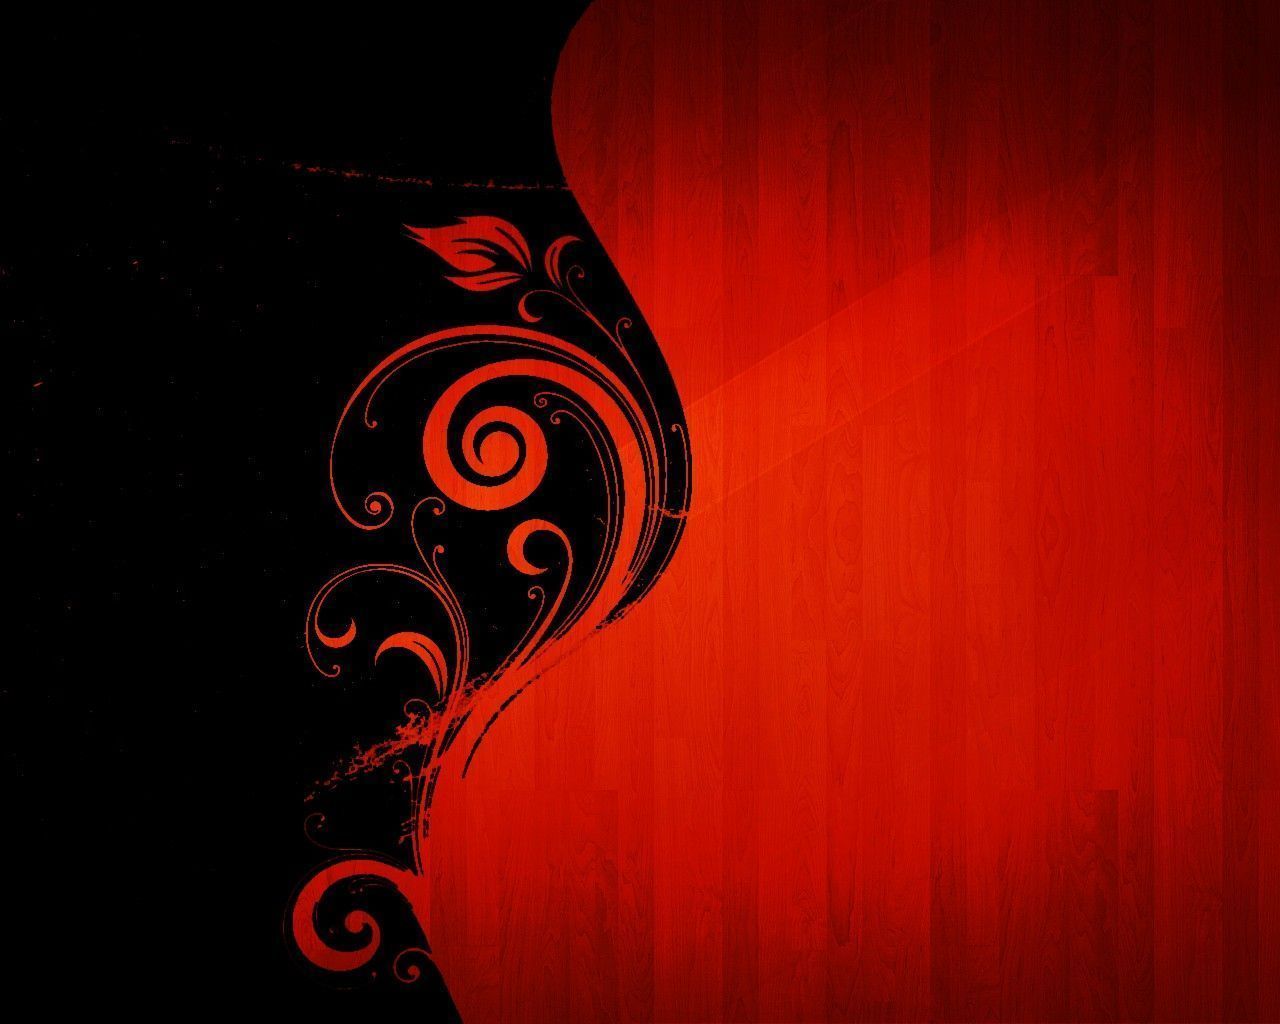 Black and Red Abstract Free Download HD Wallpaper 467. Abstract wallpaper, Black phone wallpaper, iPhone wallpaper